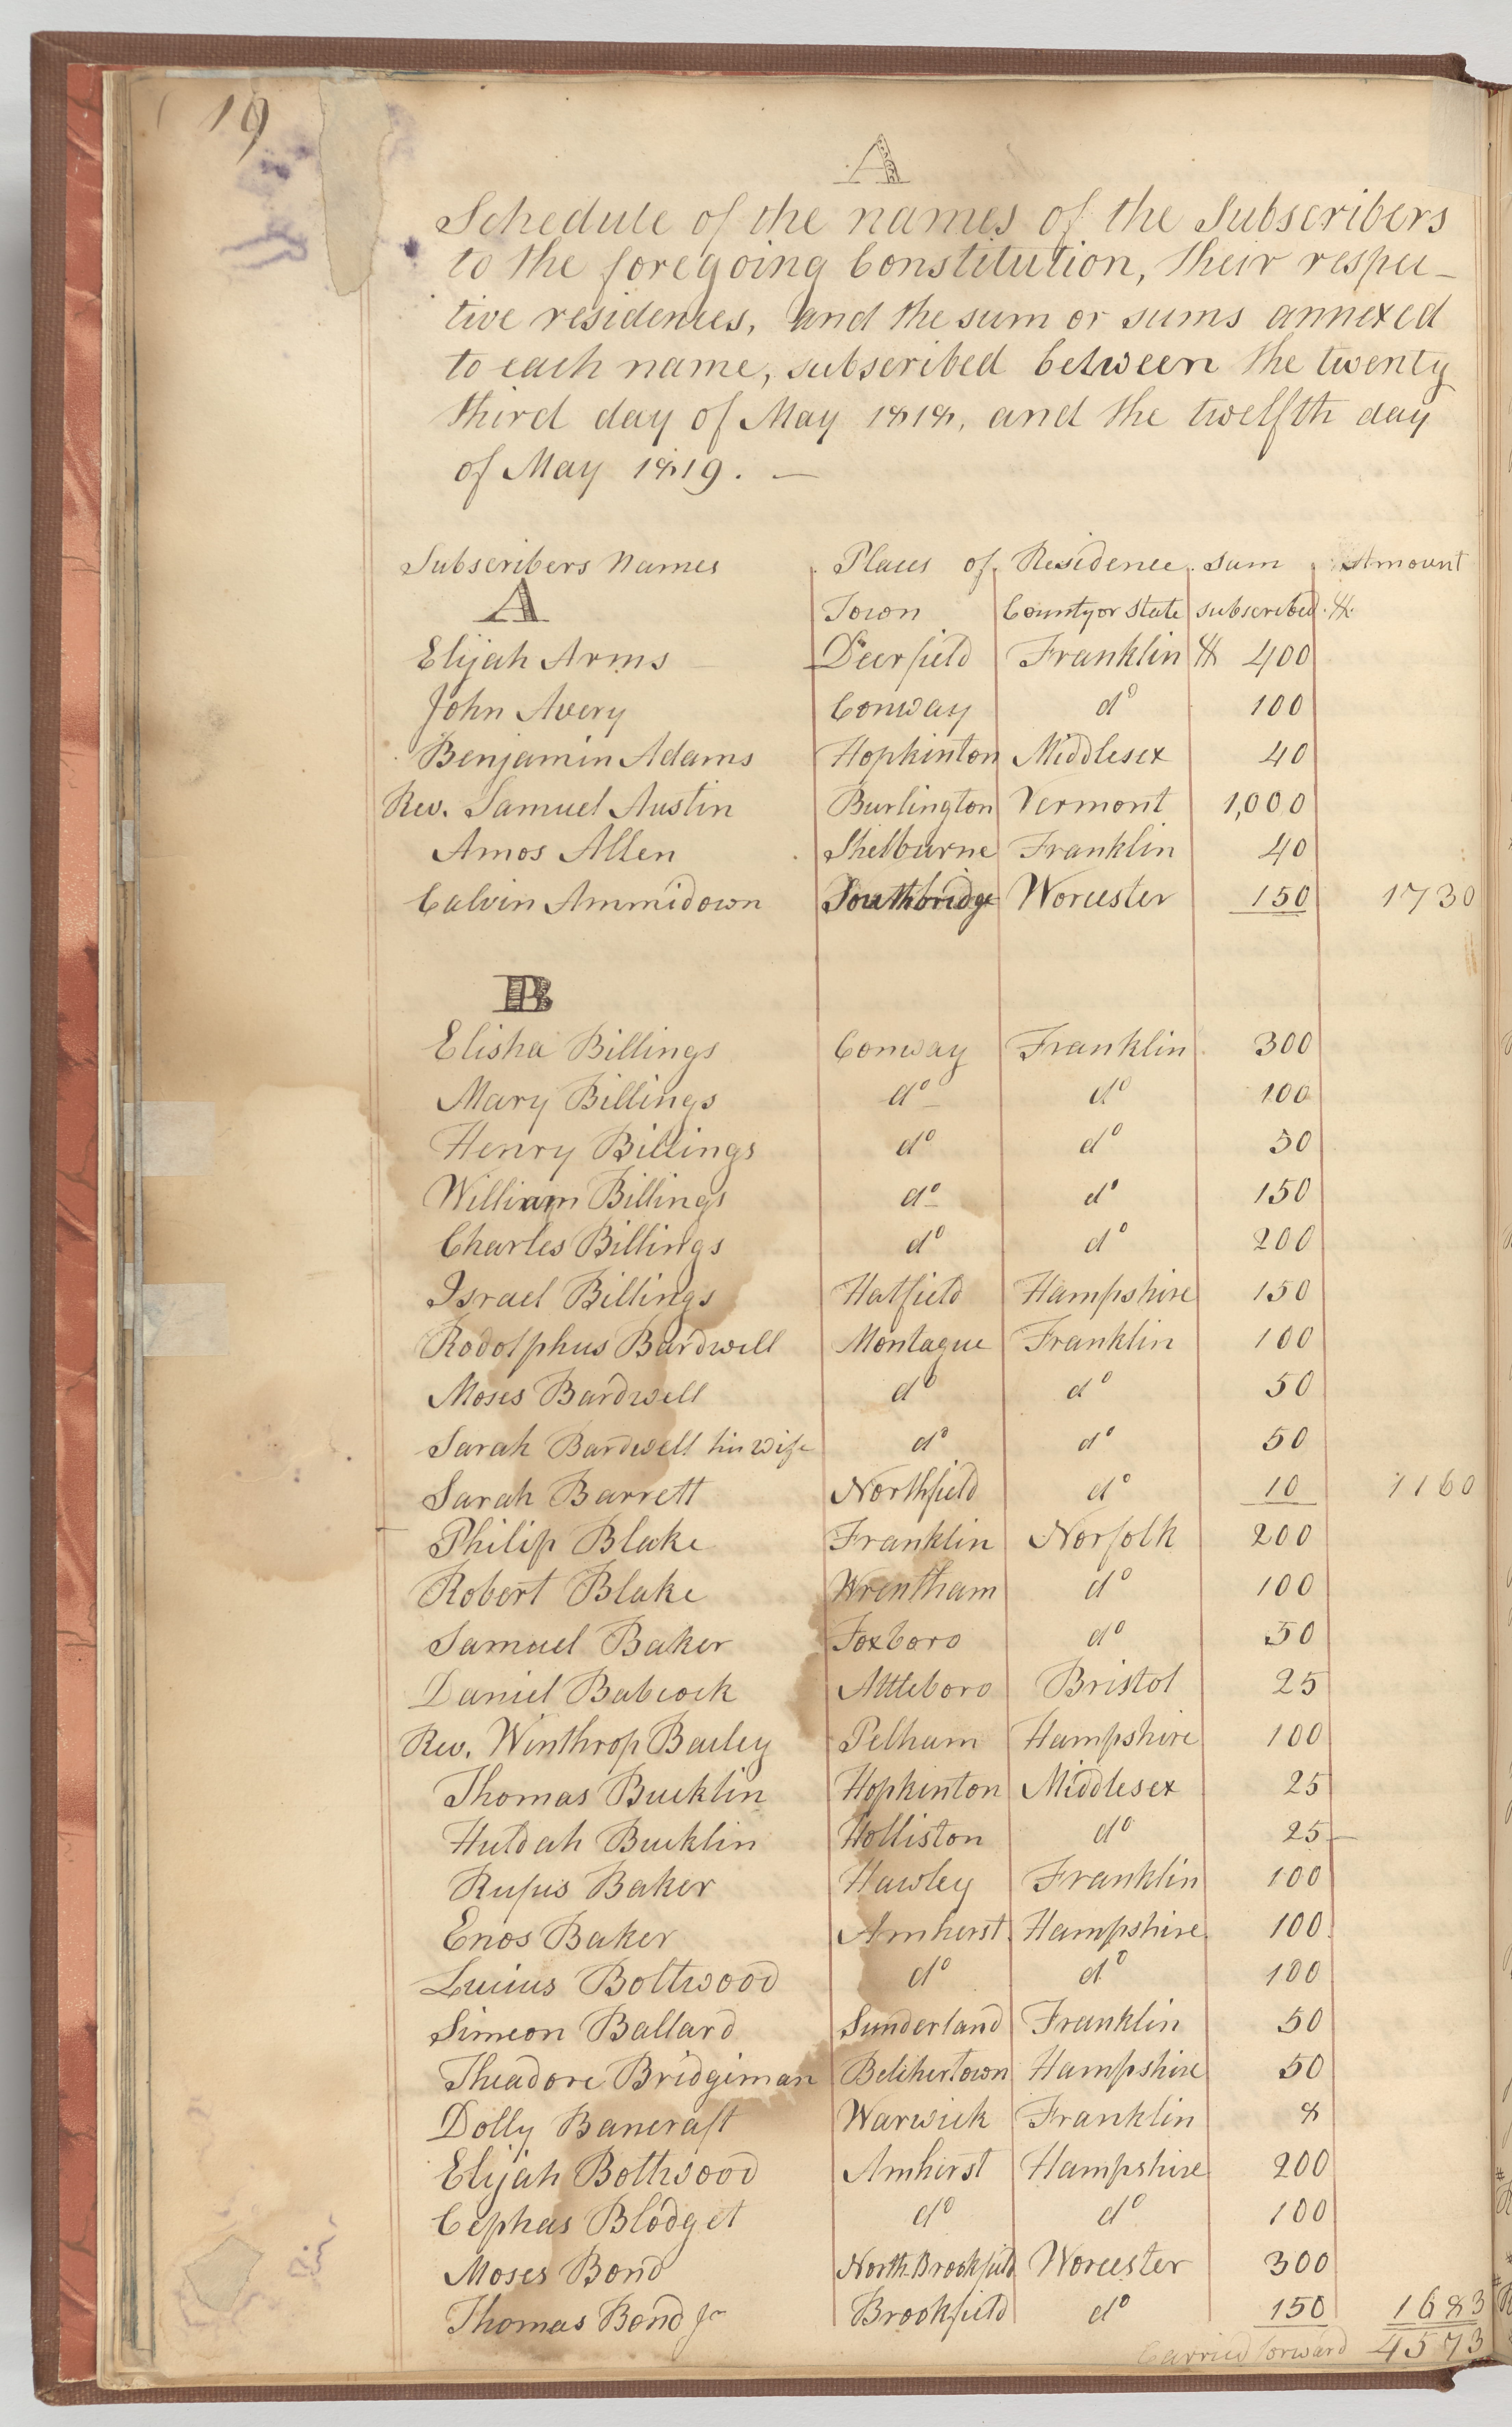 Charity Fund register listing donors who helped found Amherst College, c. 1821-1840